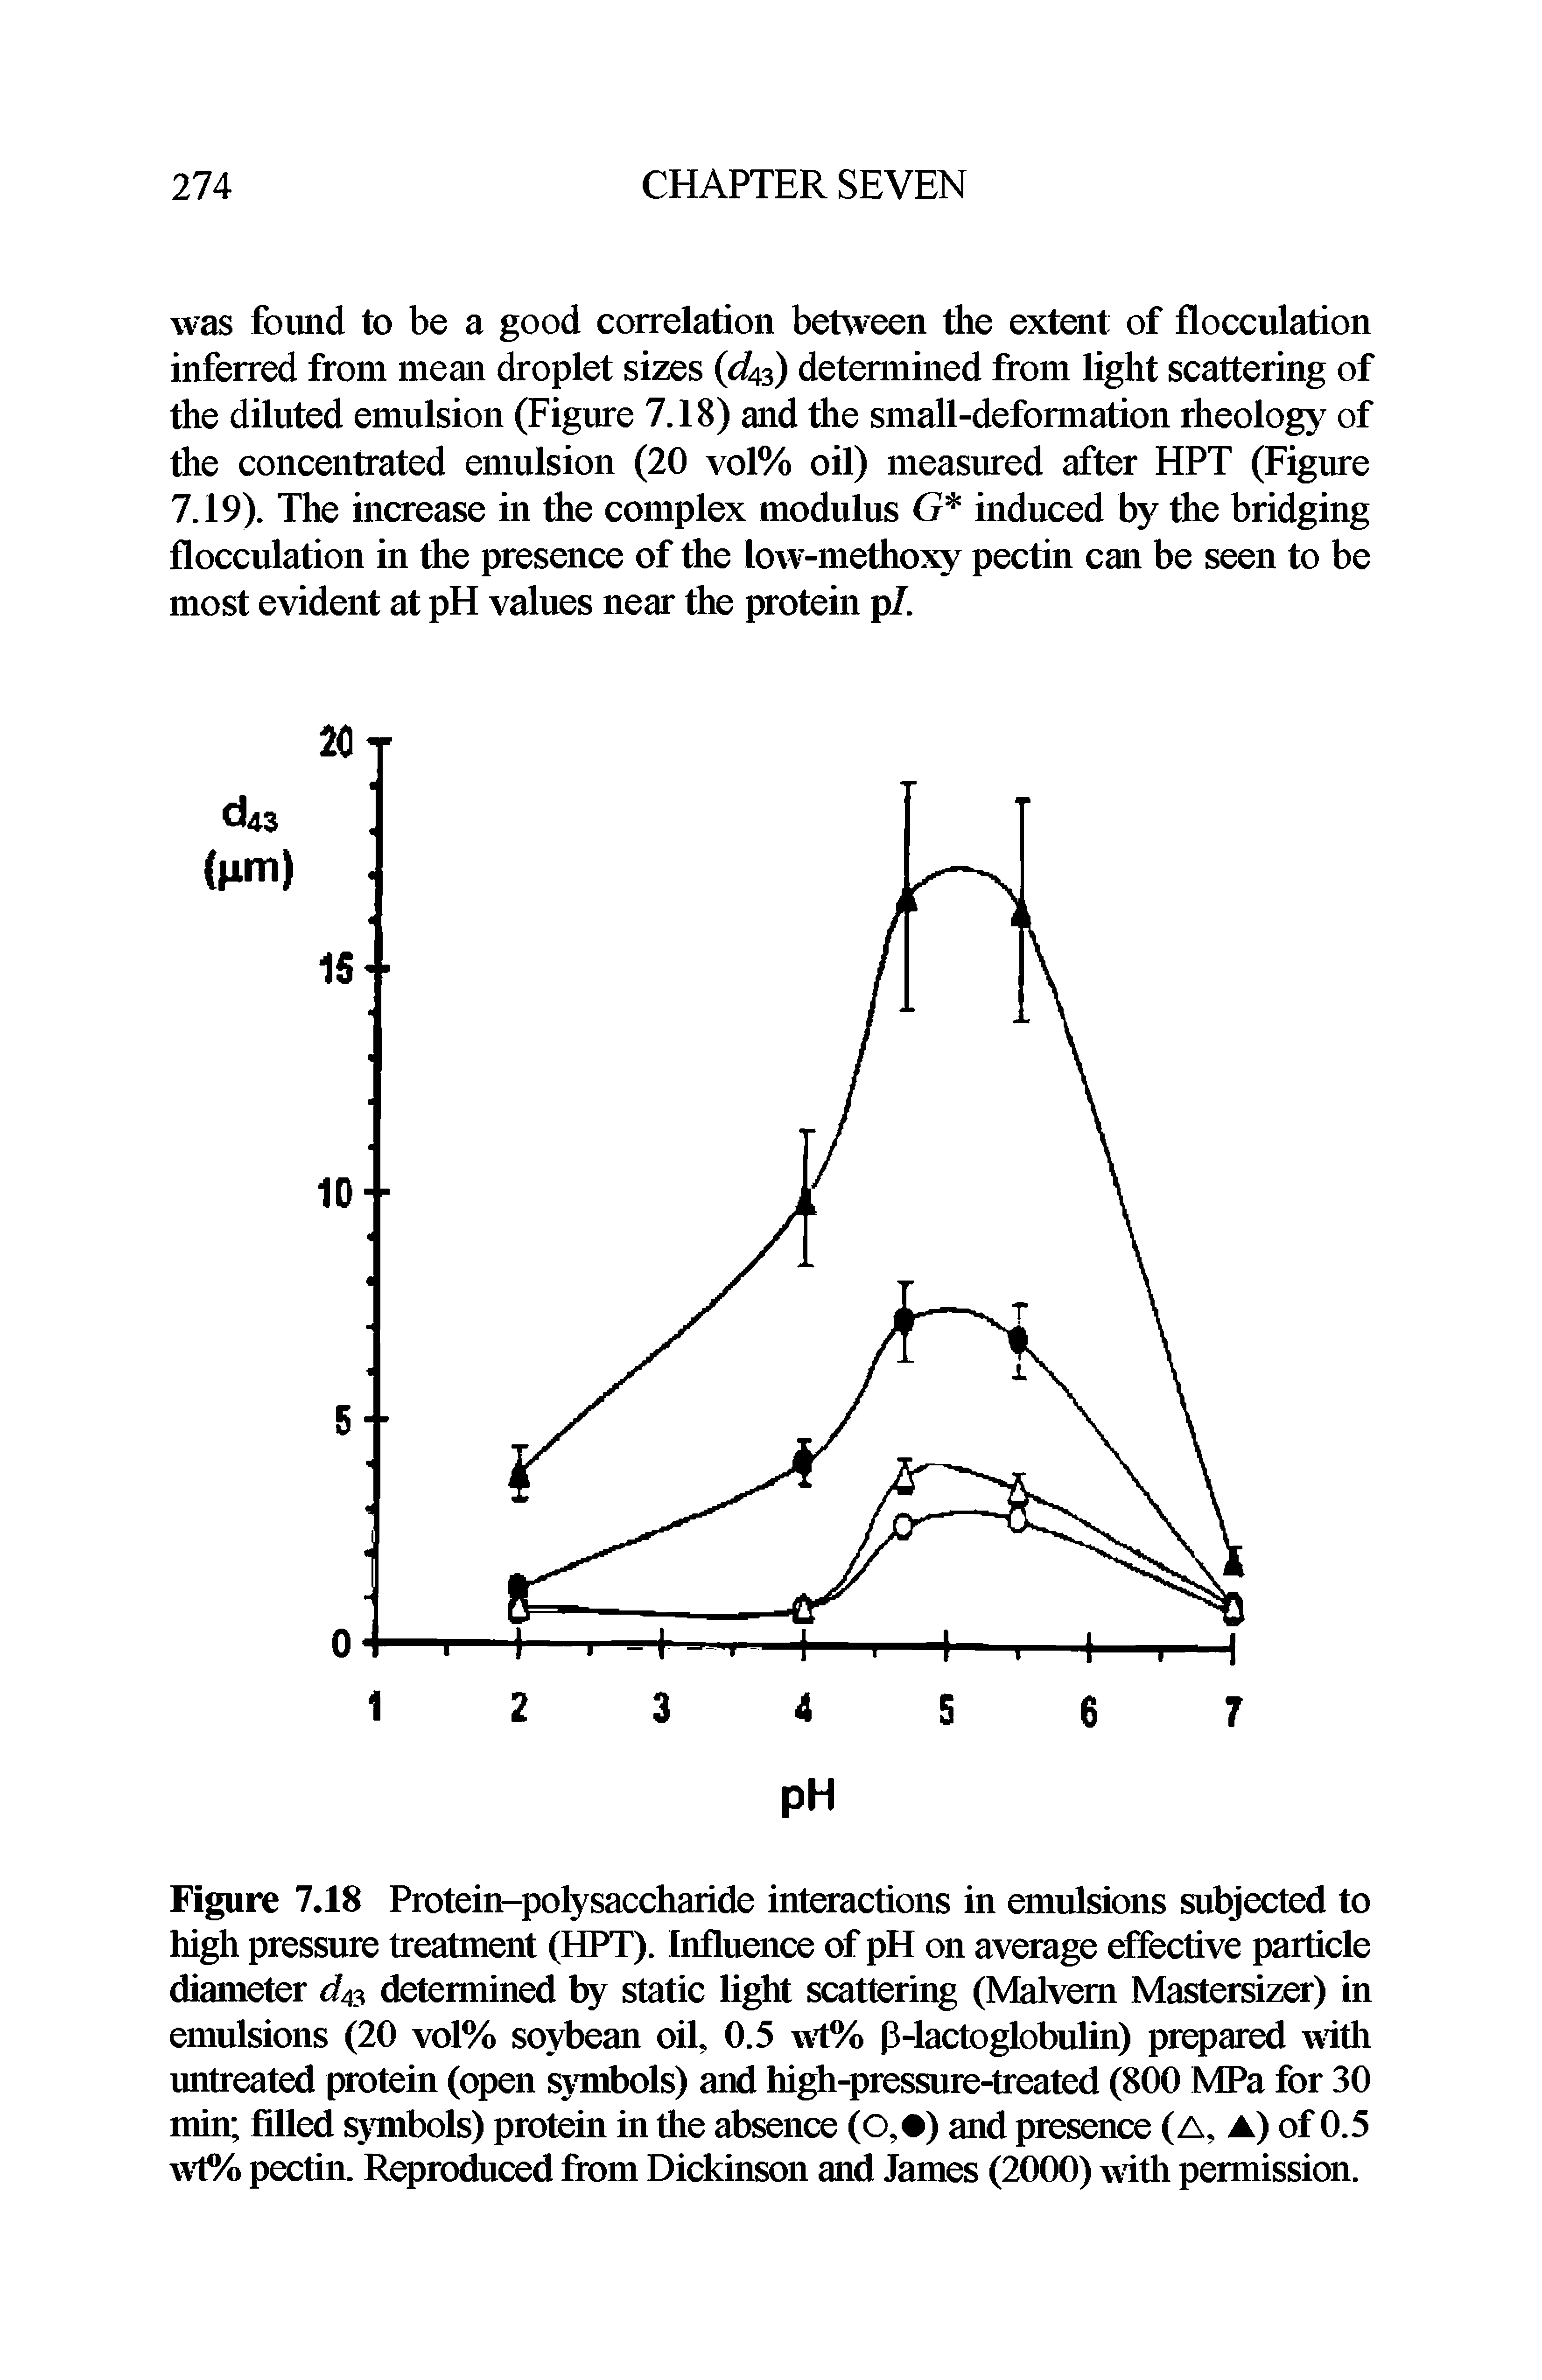 Figure 7.18 Protein-polysaccharide interactions in emulsions subjected to high pressure treatment (HPT). Influence of pH on average effective particle diameter d43 determined by static light scattering (Malvern Mastersizer) in emulsions (20 vol% soybean oil, 0.5 wt% p-lactoglobulin) prepared with untreated protein (open symbols) and high-pressure-treated (800 MPa for 30 min filled symbols) protein in the absence (O, ) and presence (A, ) of 0.5 wt% pectin. Reproduced from Dickinson and James (2000) with permission.